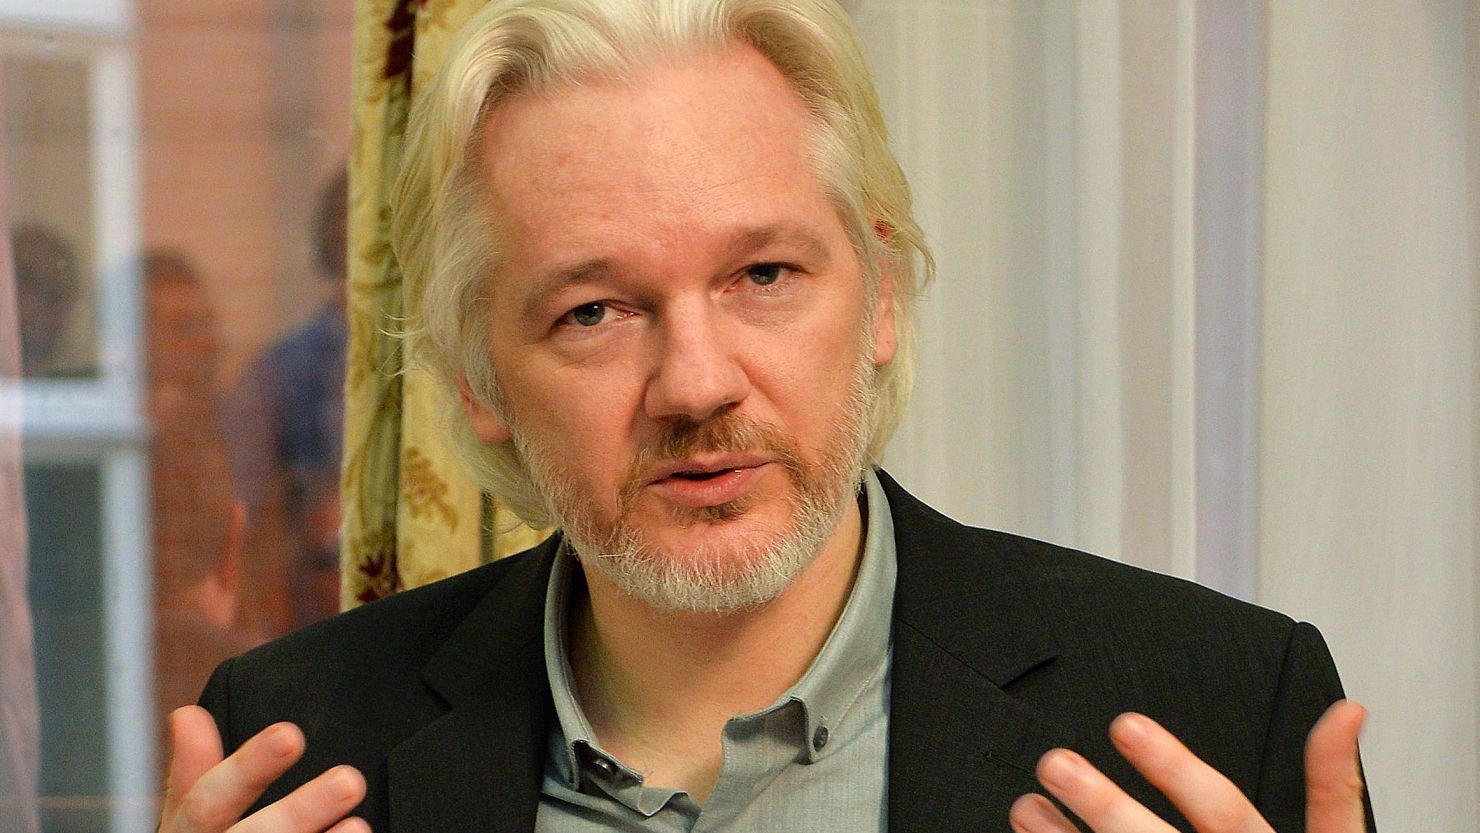 This file photo shows WikiLeaks founder Julian Assange during a press conference inside the Ecuadorian Embassy in London on August 18, 2014.